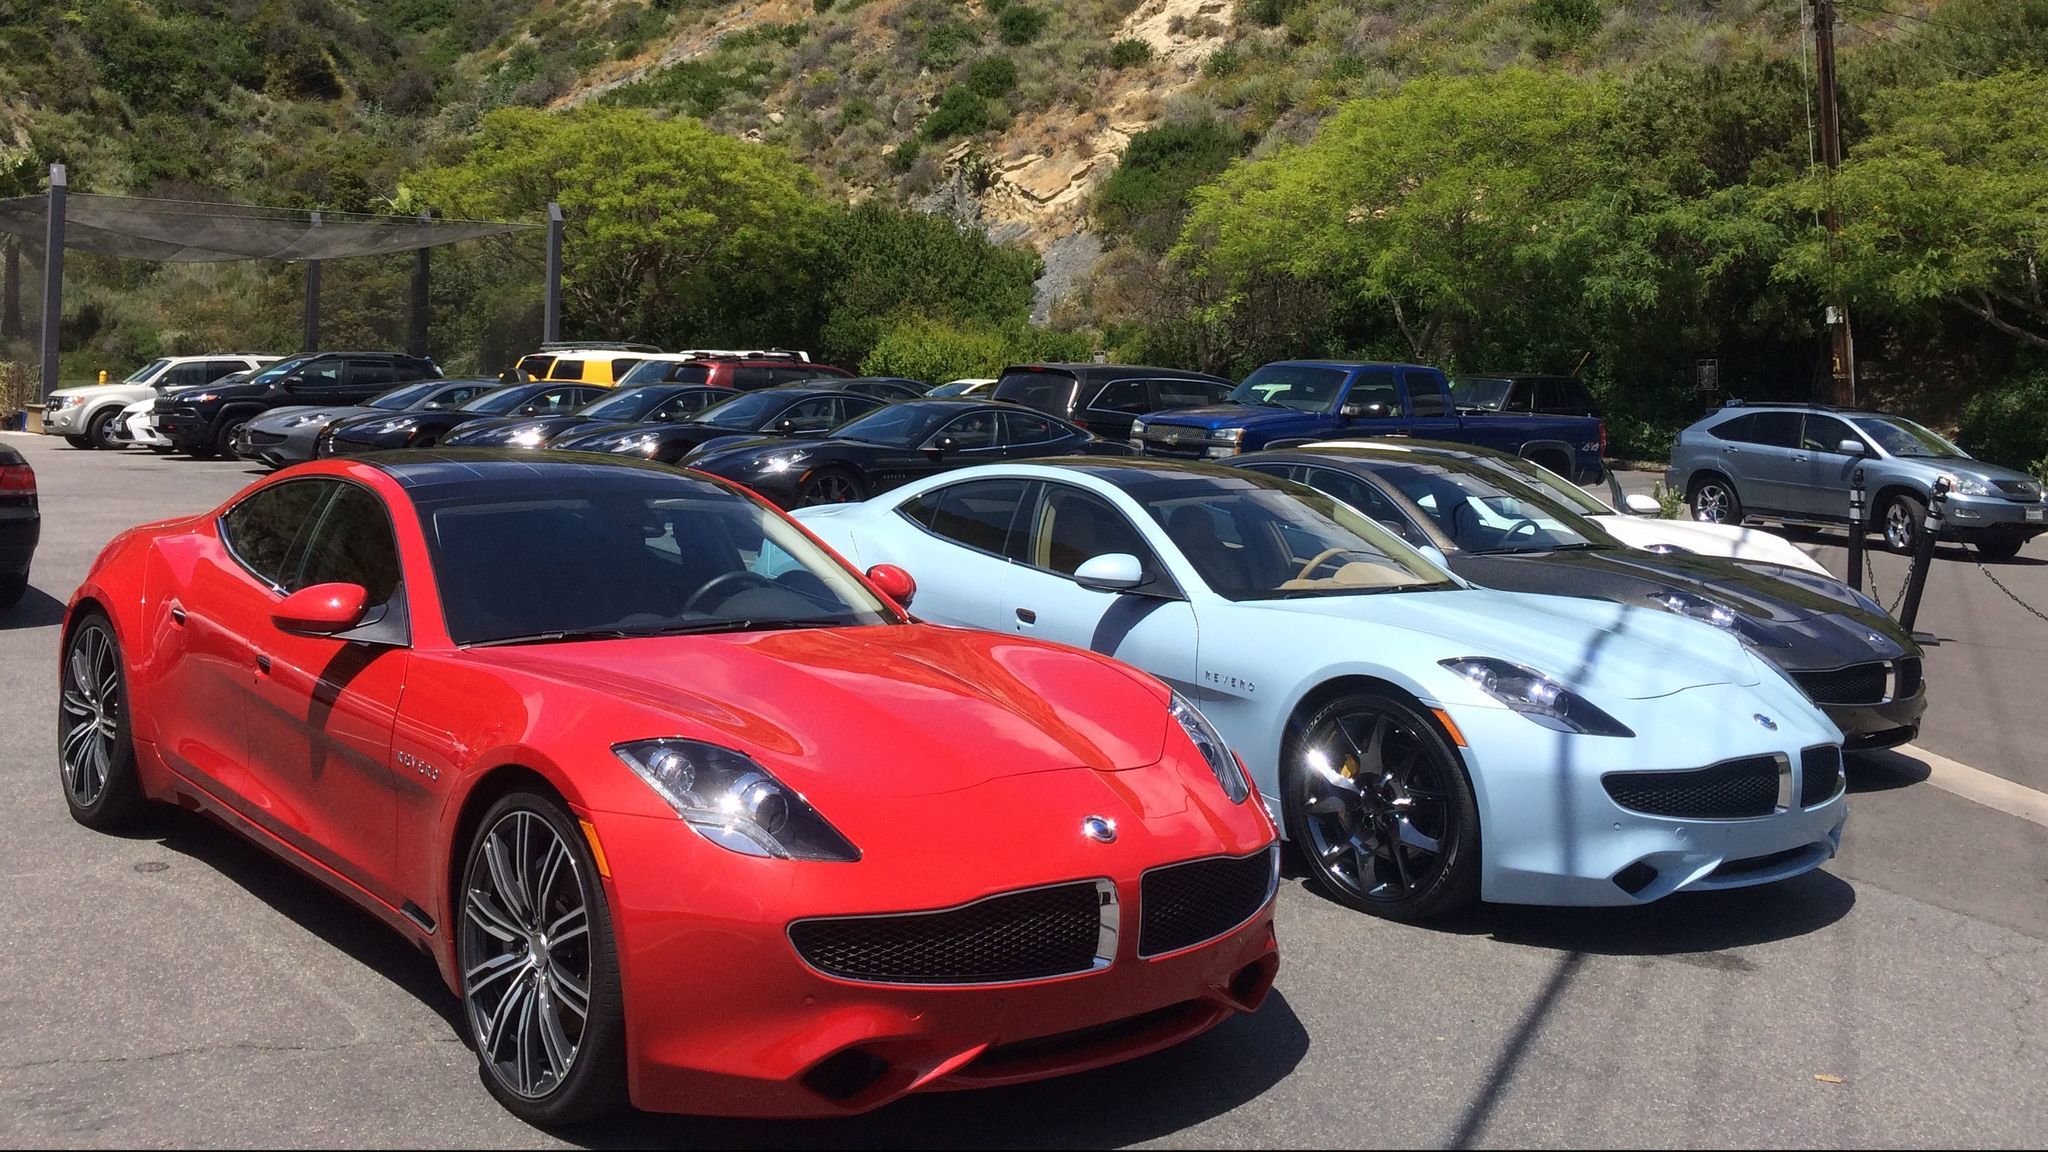 A collection of Karma Reveros, prepped for driving, sit in Laguna Beach.